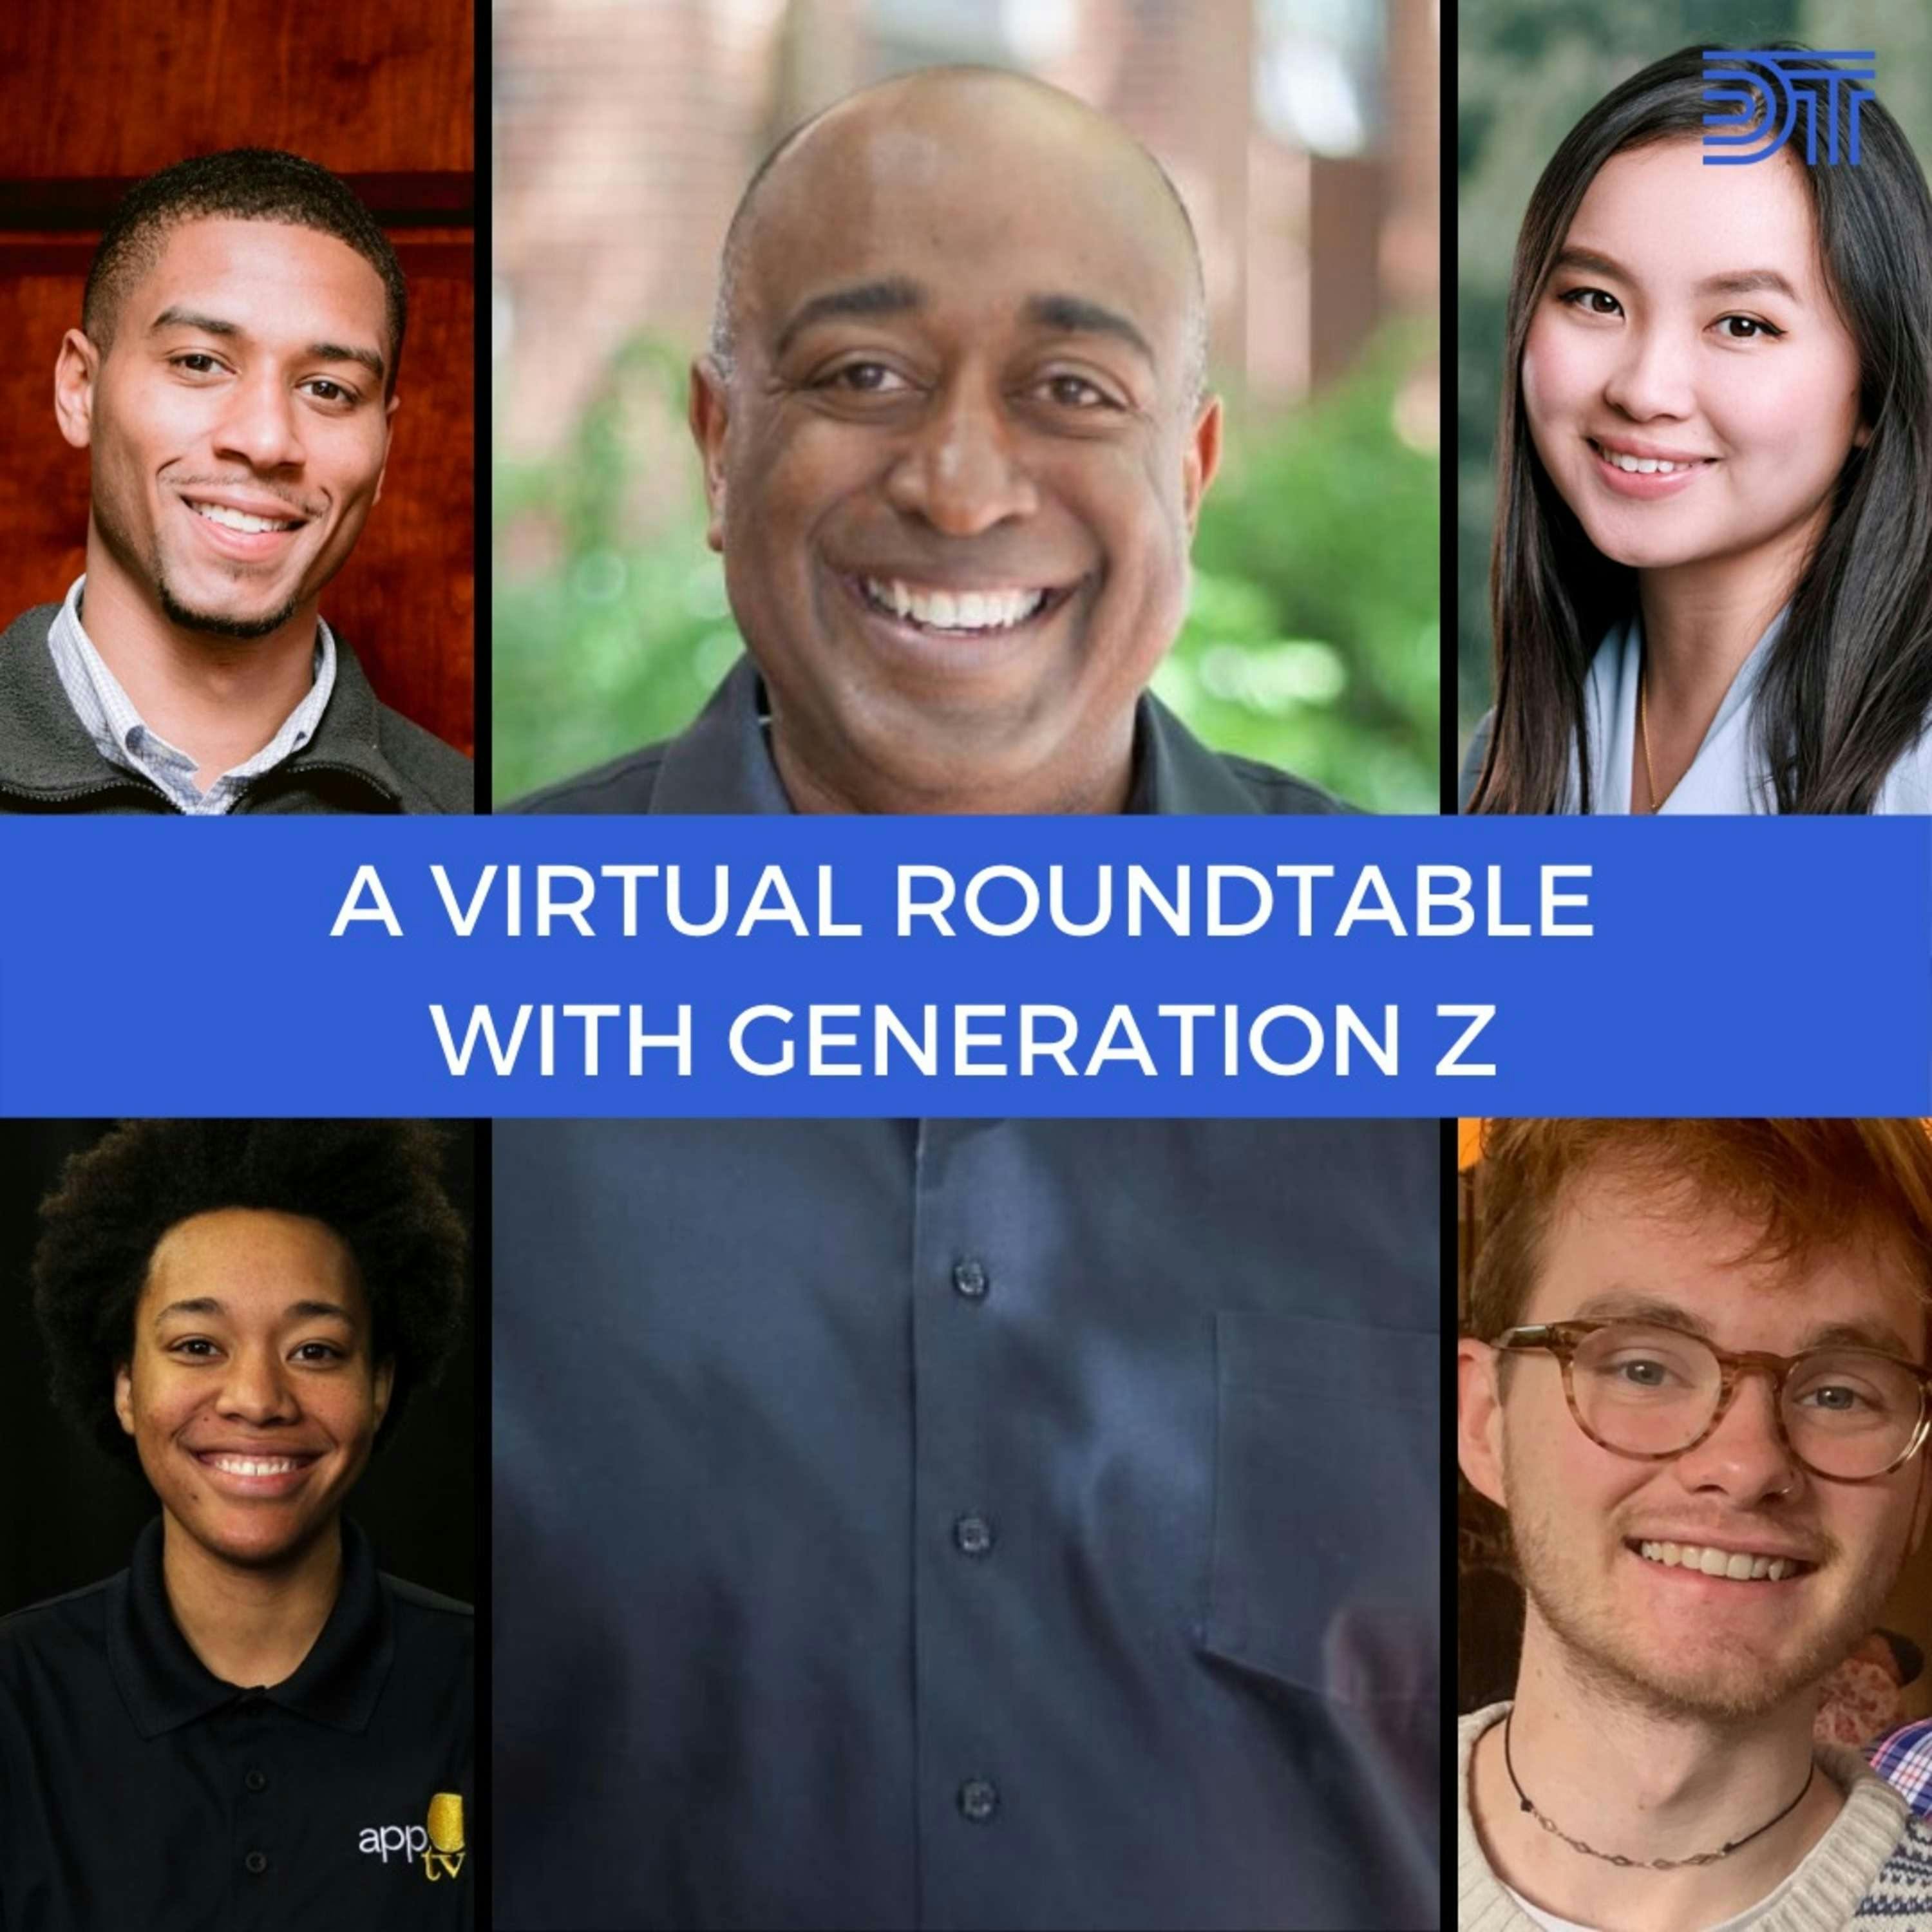 Gen Z Roundtable: What are the Leaders of Tomorrow Looking For?